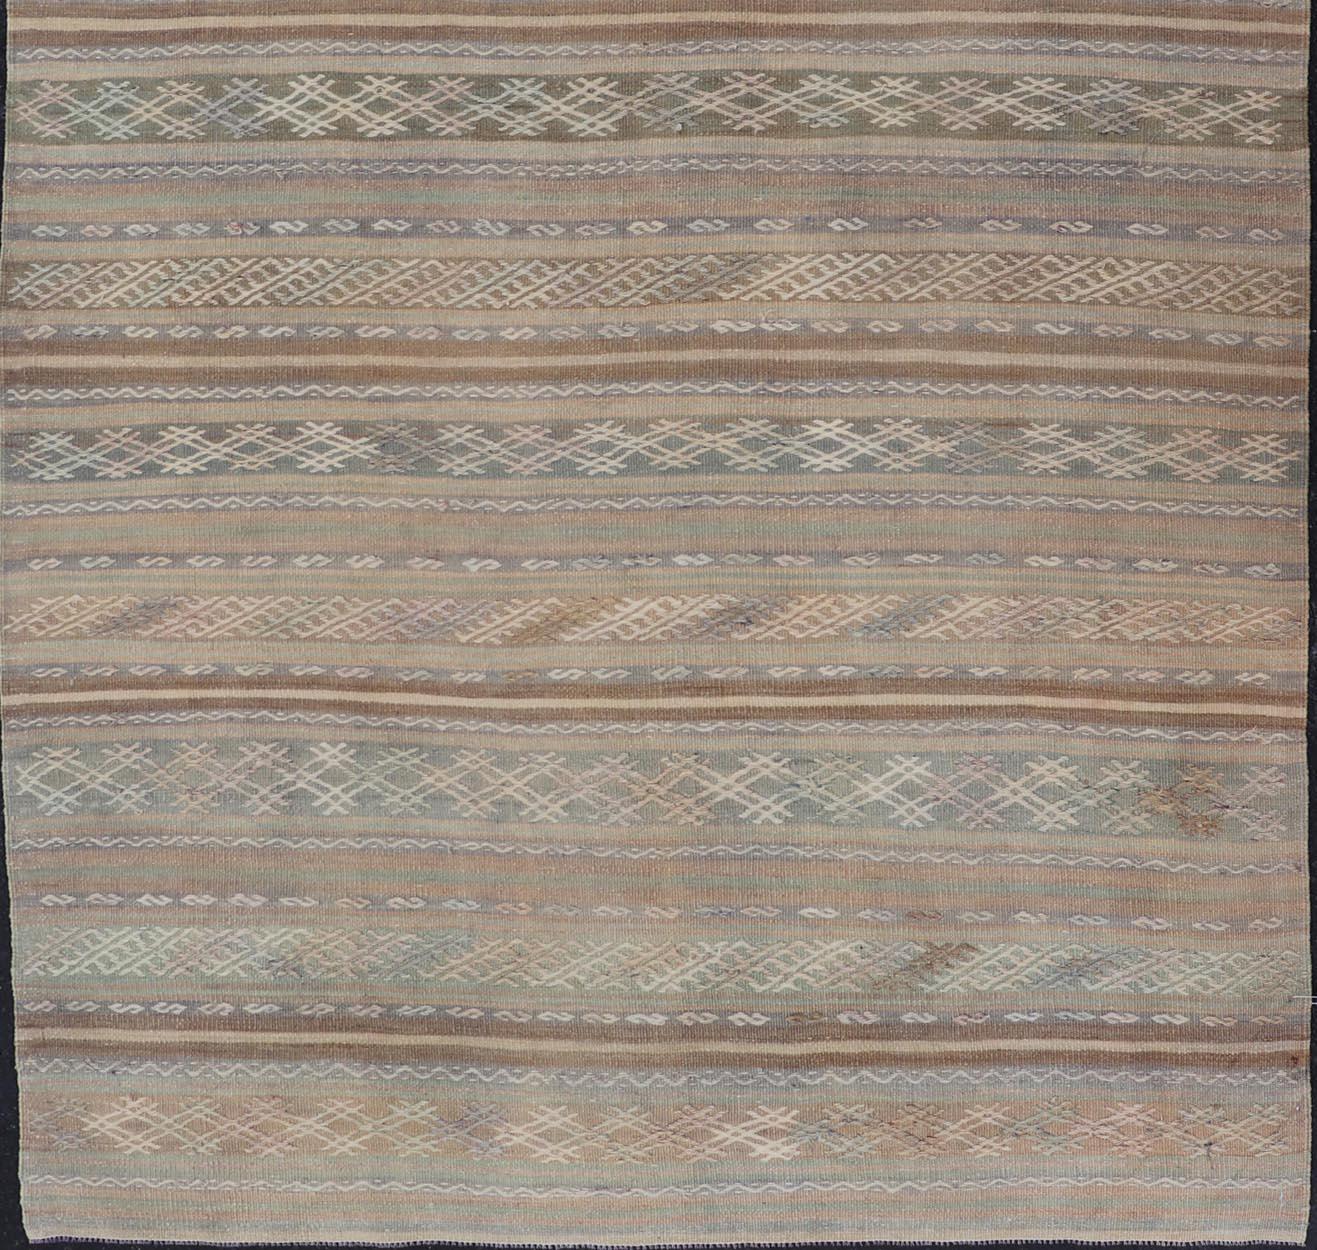 20th Century Vintage Turkish Flat-Weave Kilim with Embroideries in Muted Tones and Stripes